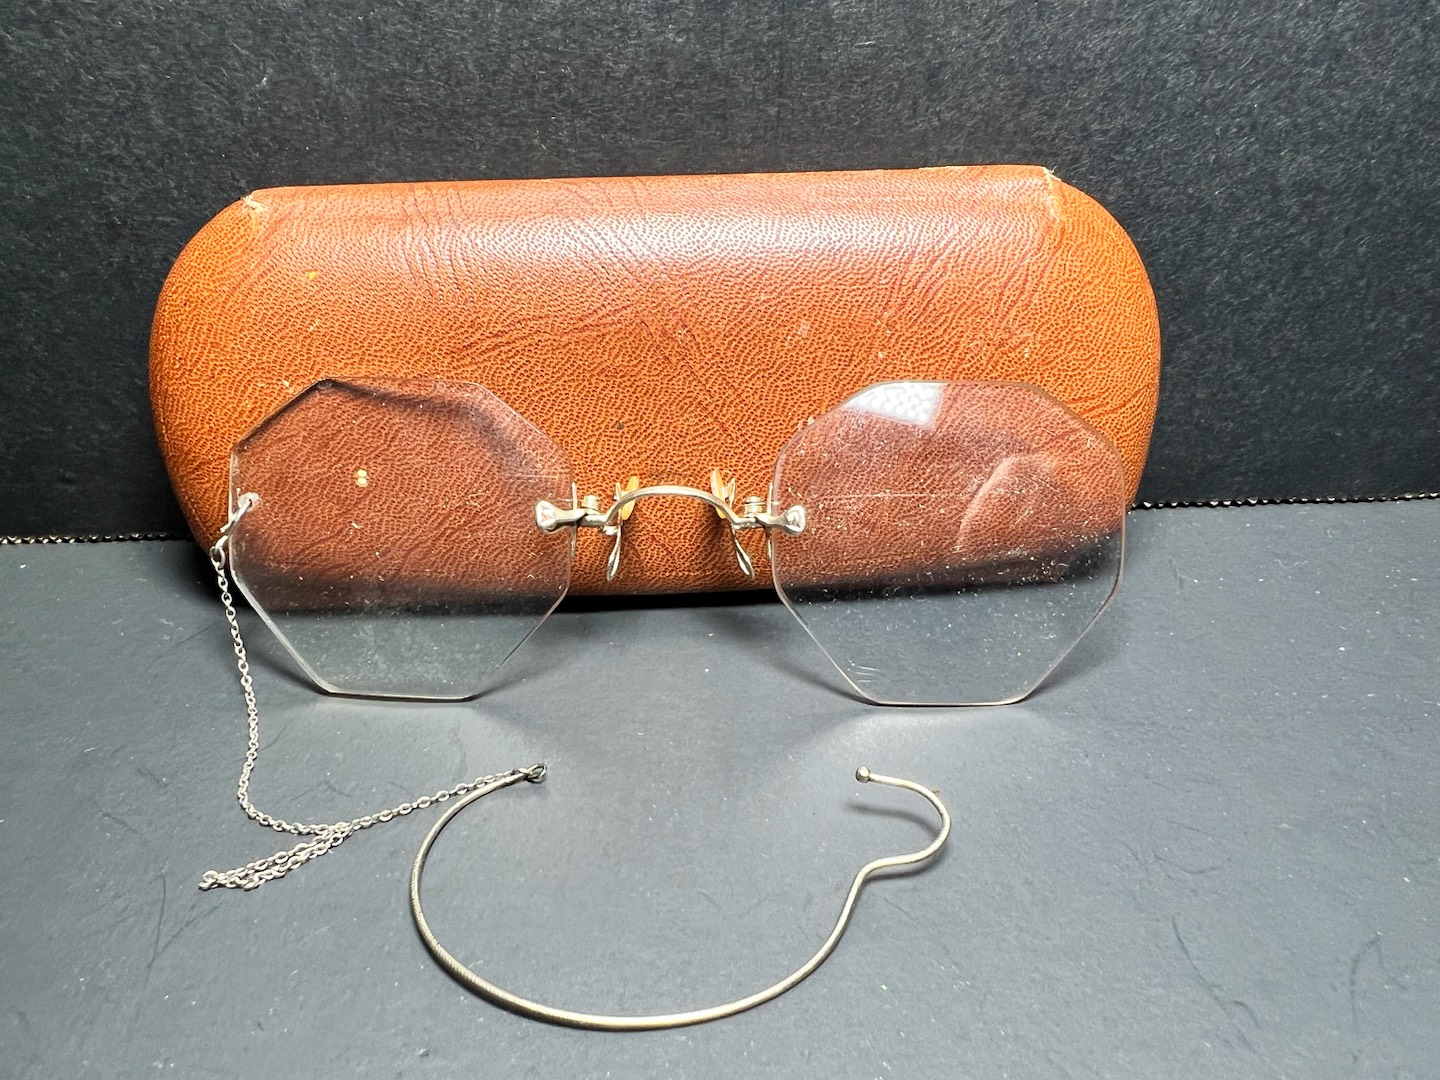 Sold at Auction: A PINCE CARD HOLDER WITH BILL CLIP BY LOUIS